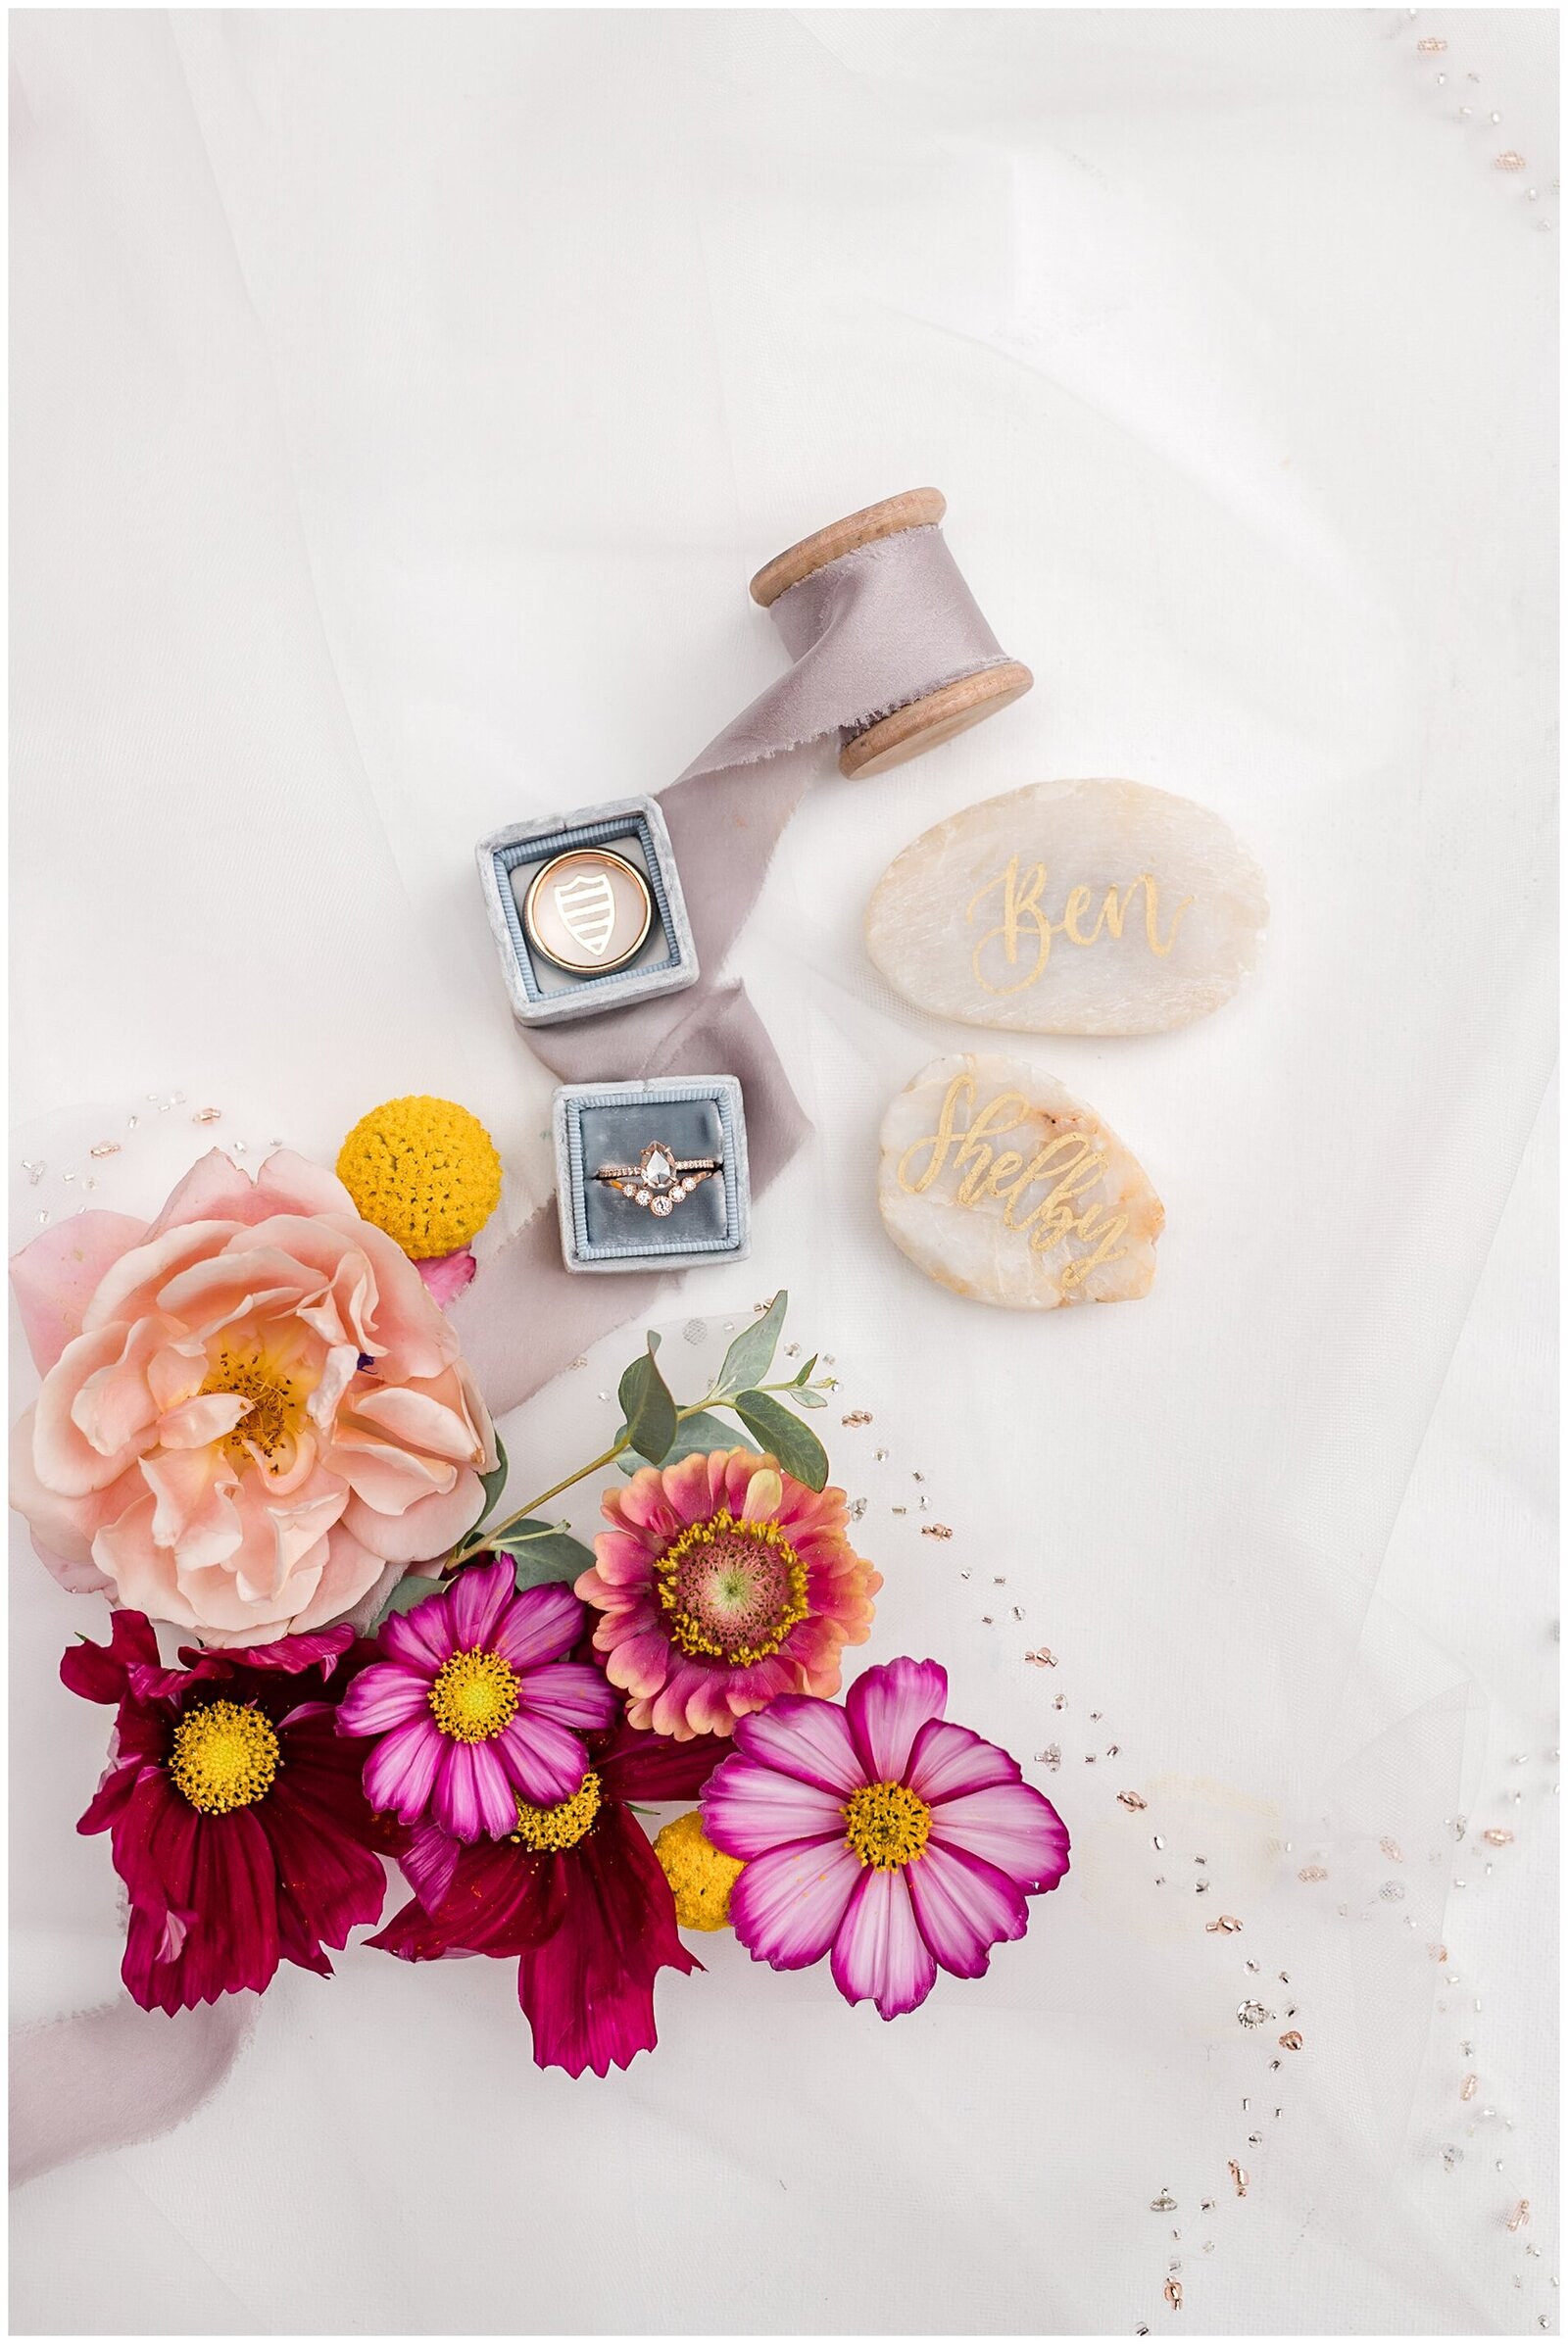 Flatlay of wedding rings in blue box next to flowers and stones